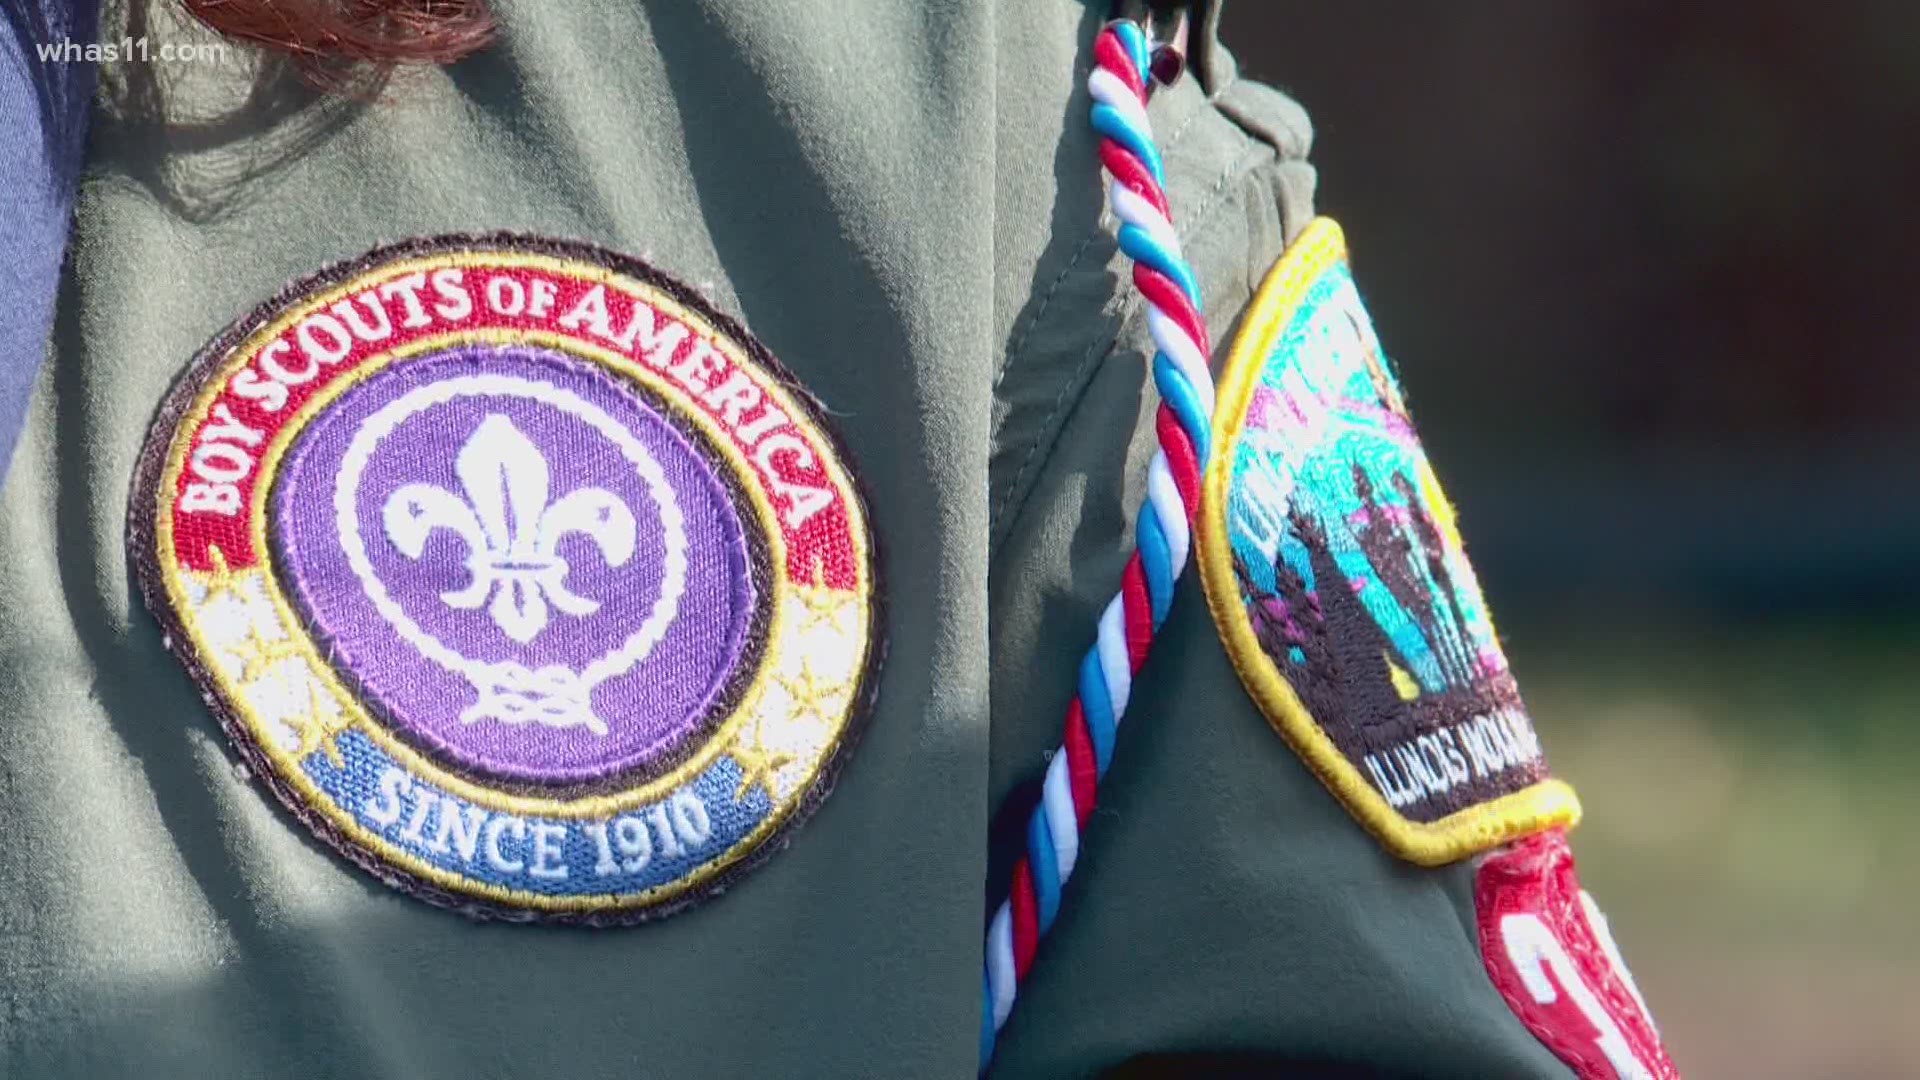 This Saturday, the scouts of Troop 309 in Louisville will take their neighborhoods and collect canned goods and hygiene products like they have in years past.